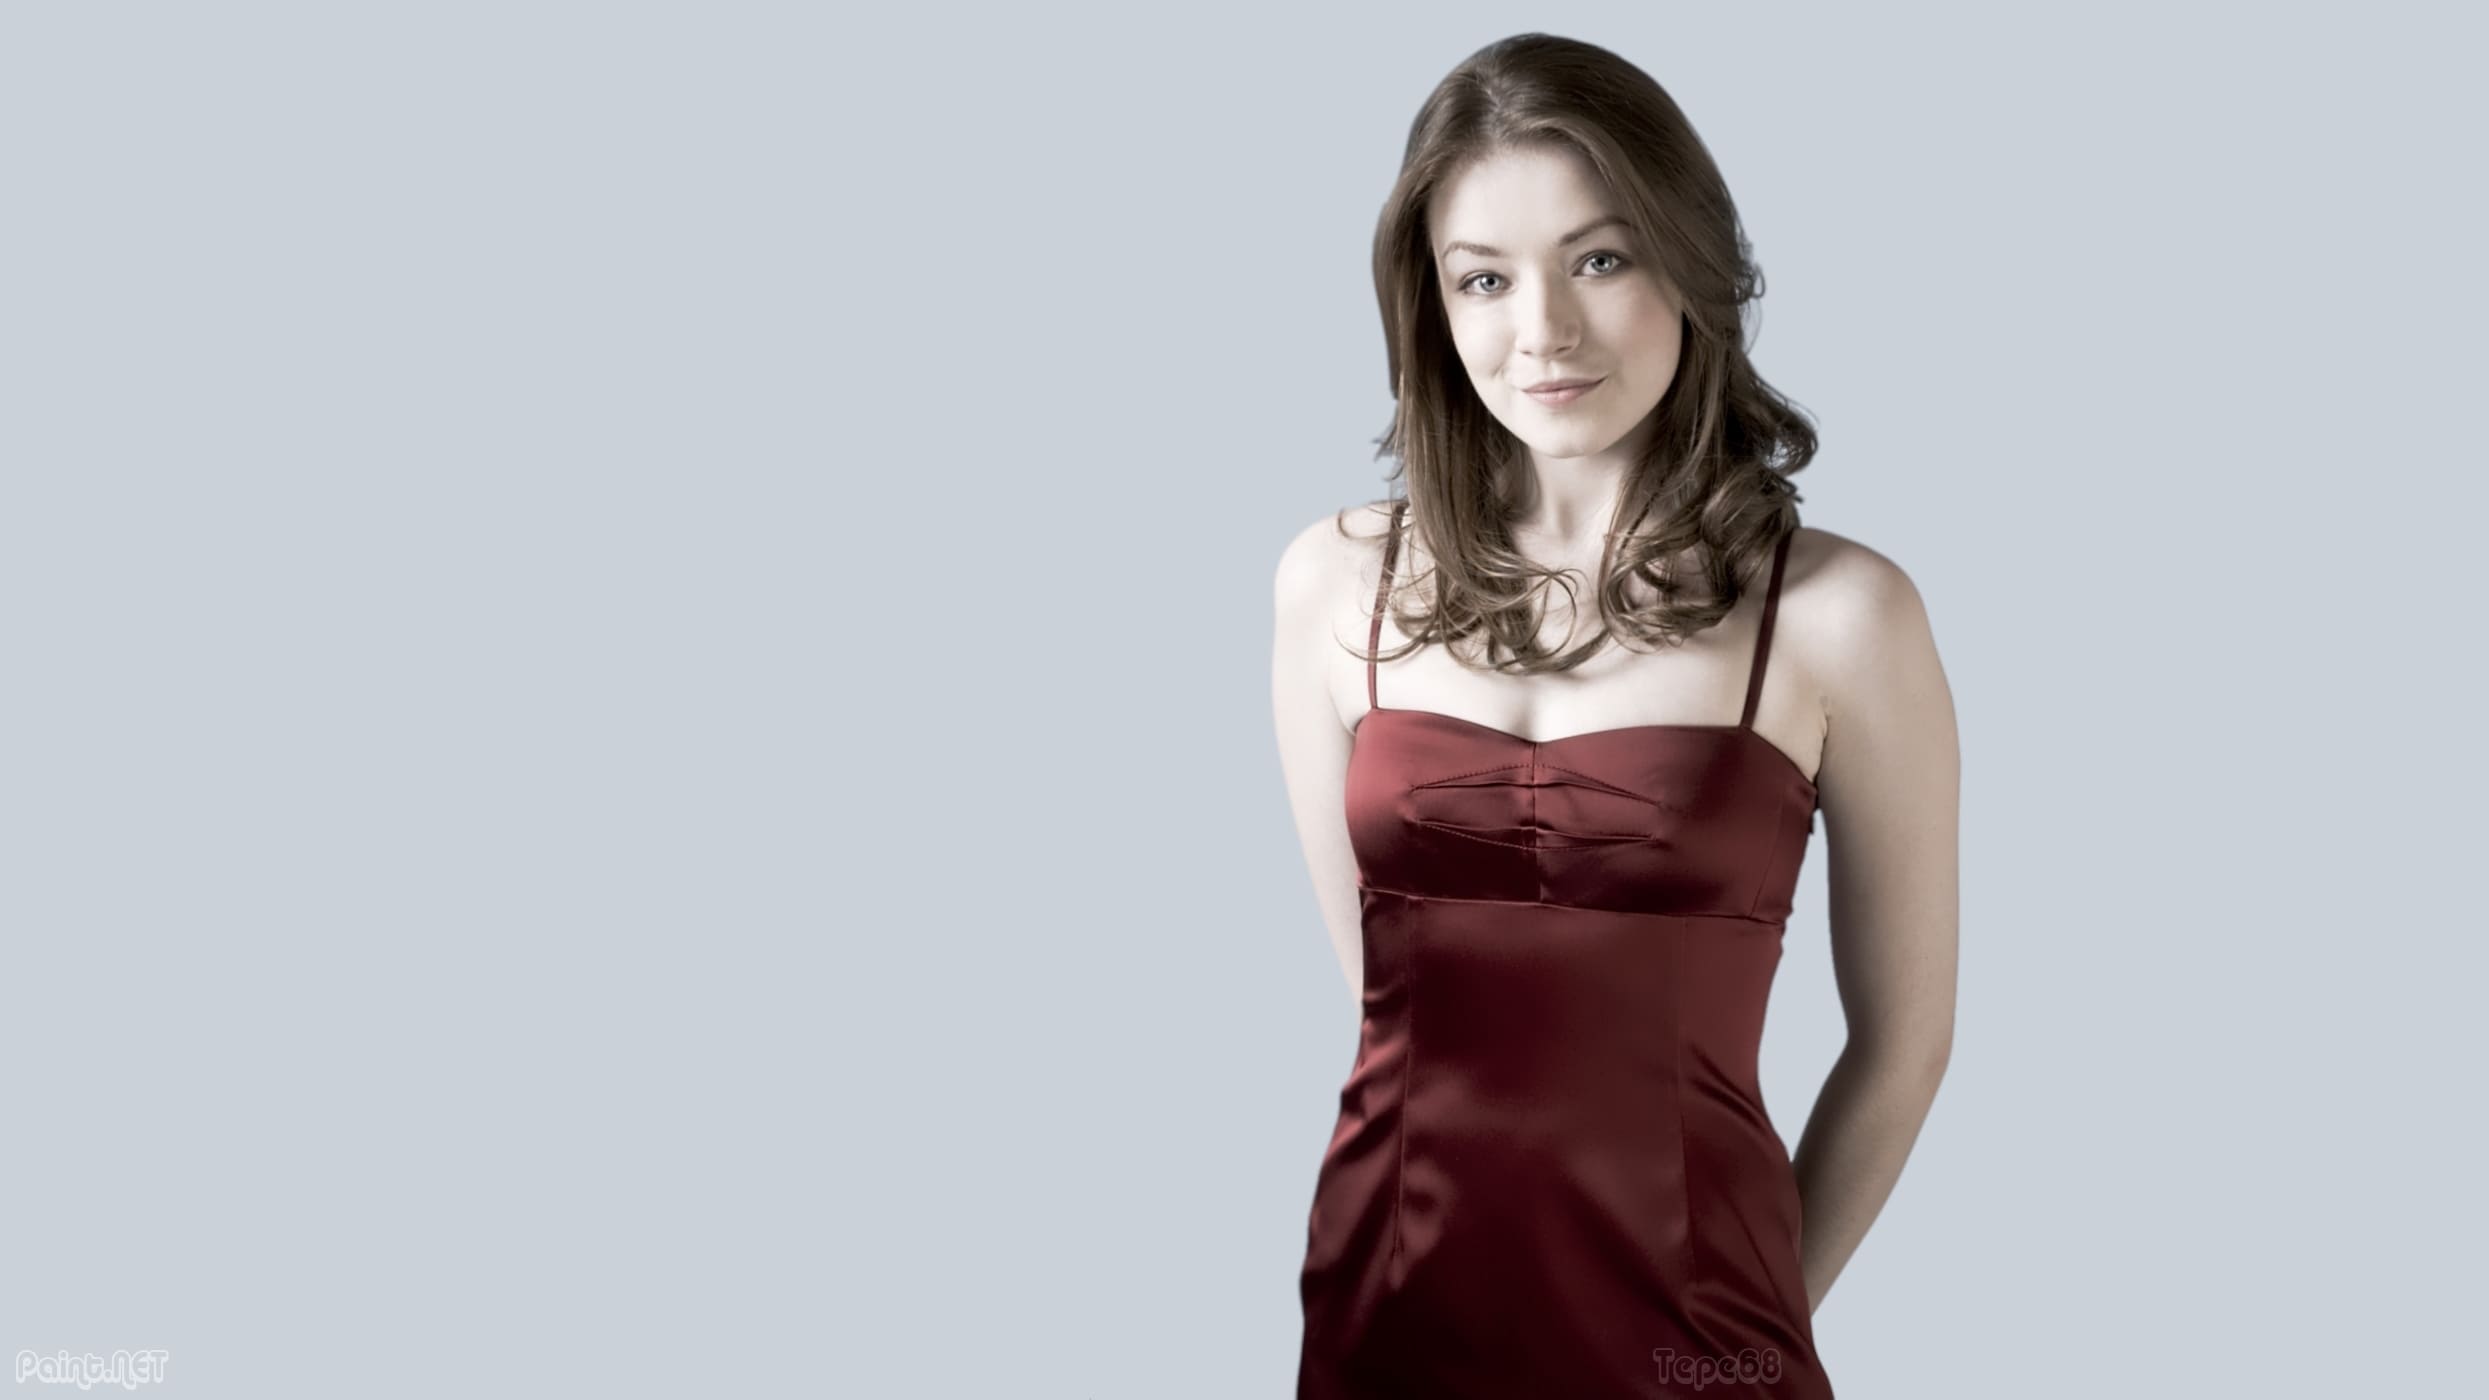 60+ Hot Pictures Of Sarah Bolger Which Are Stunningly Ravishing | Best Of Comic Books